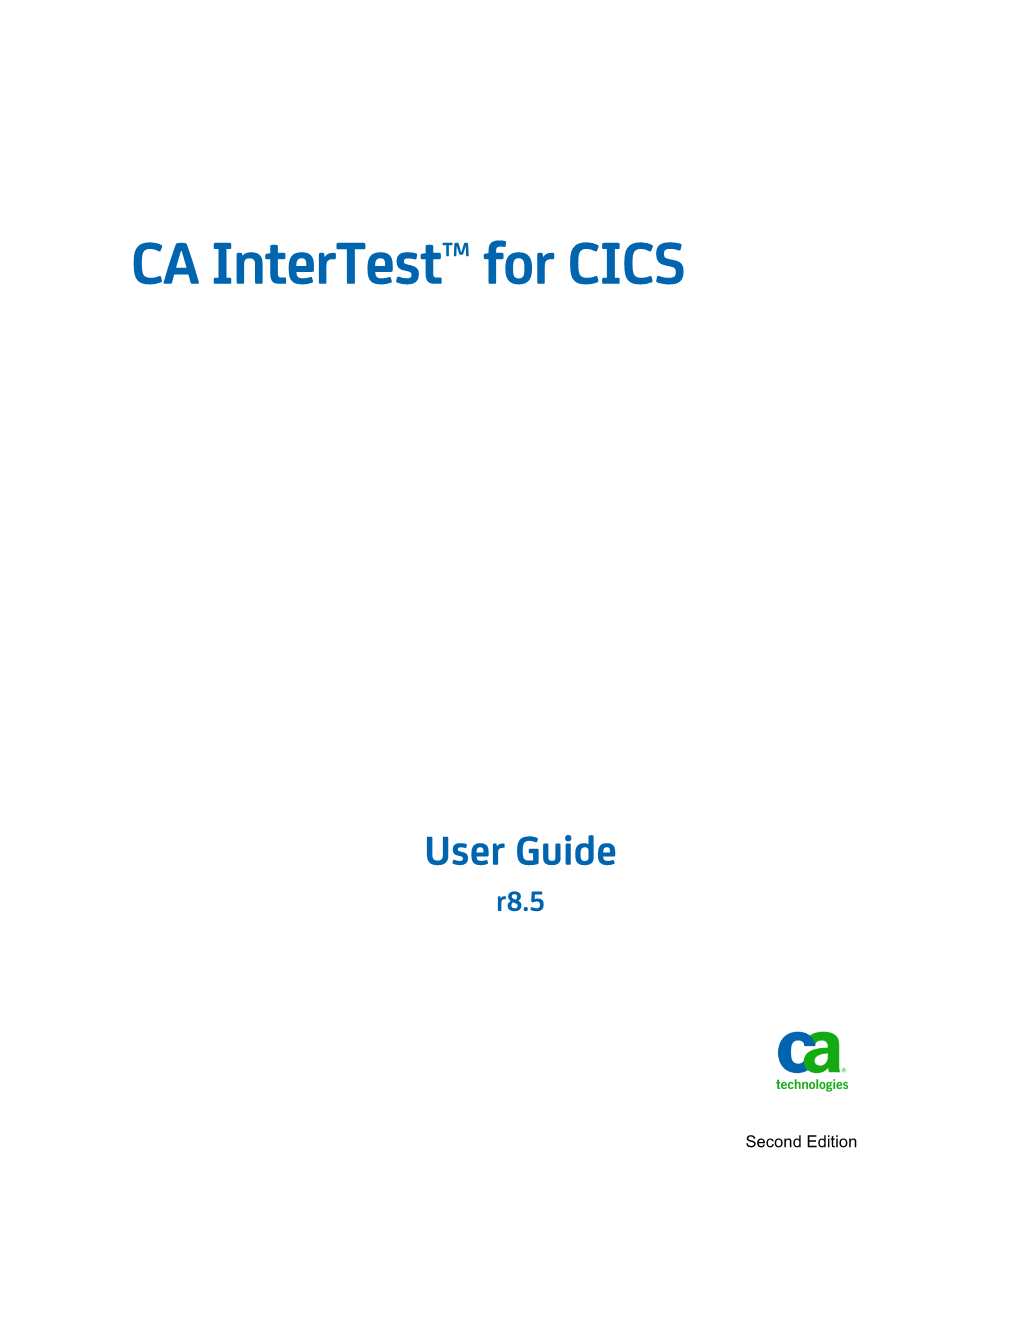 What Is CA Intertest for CICS?